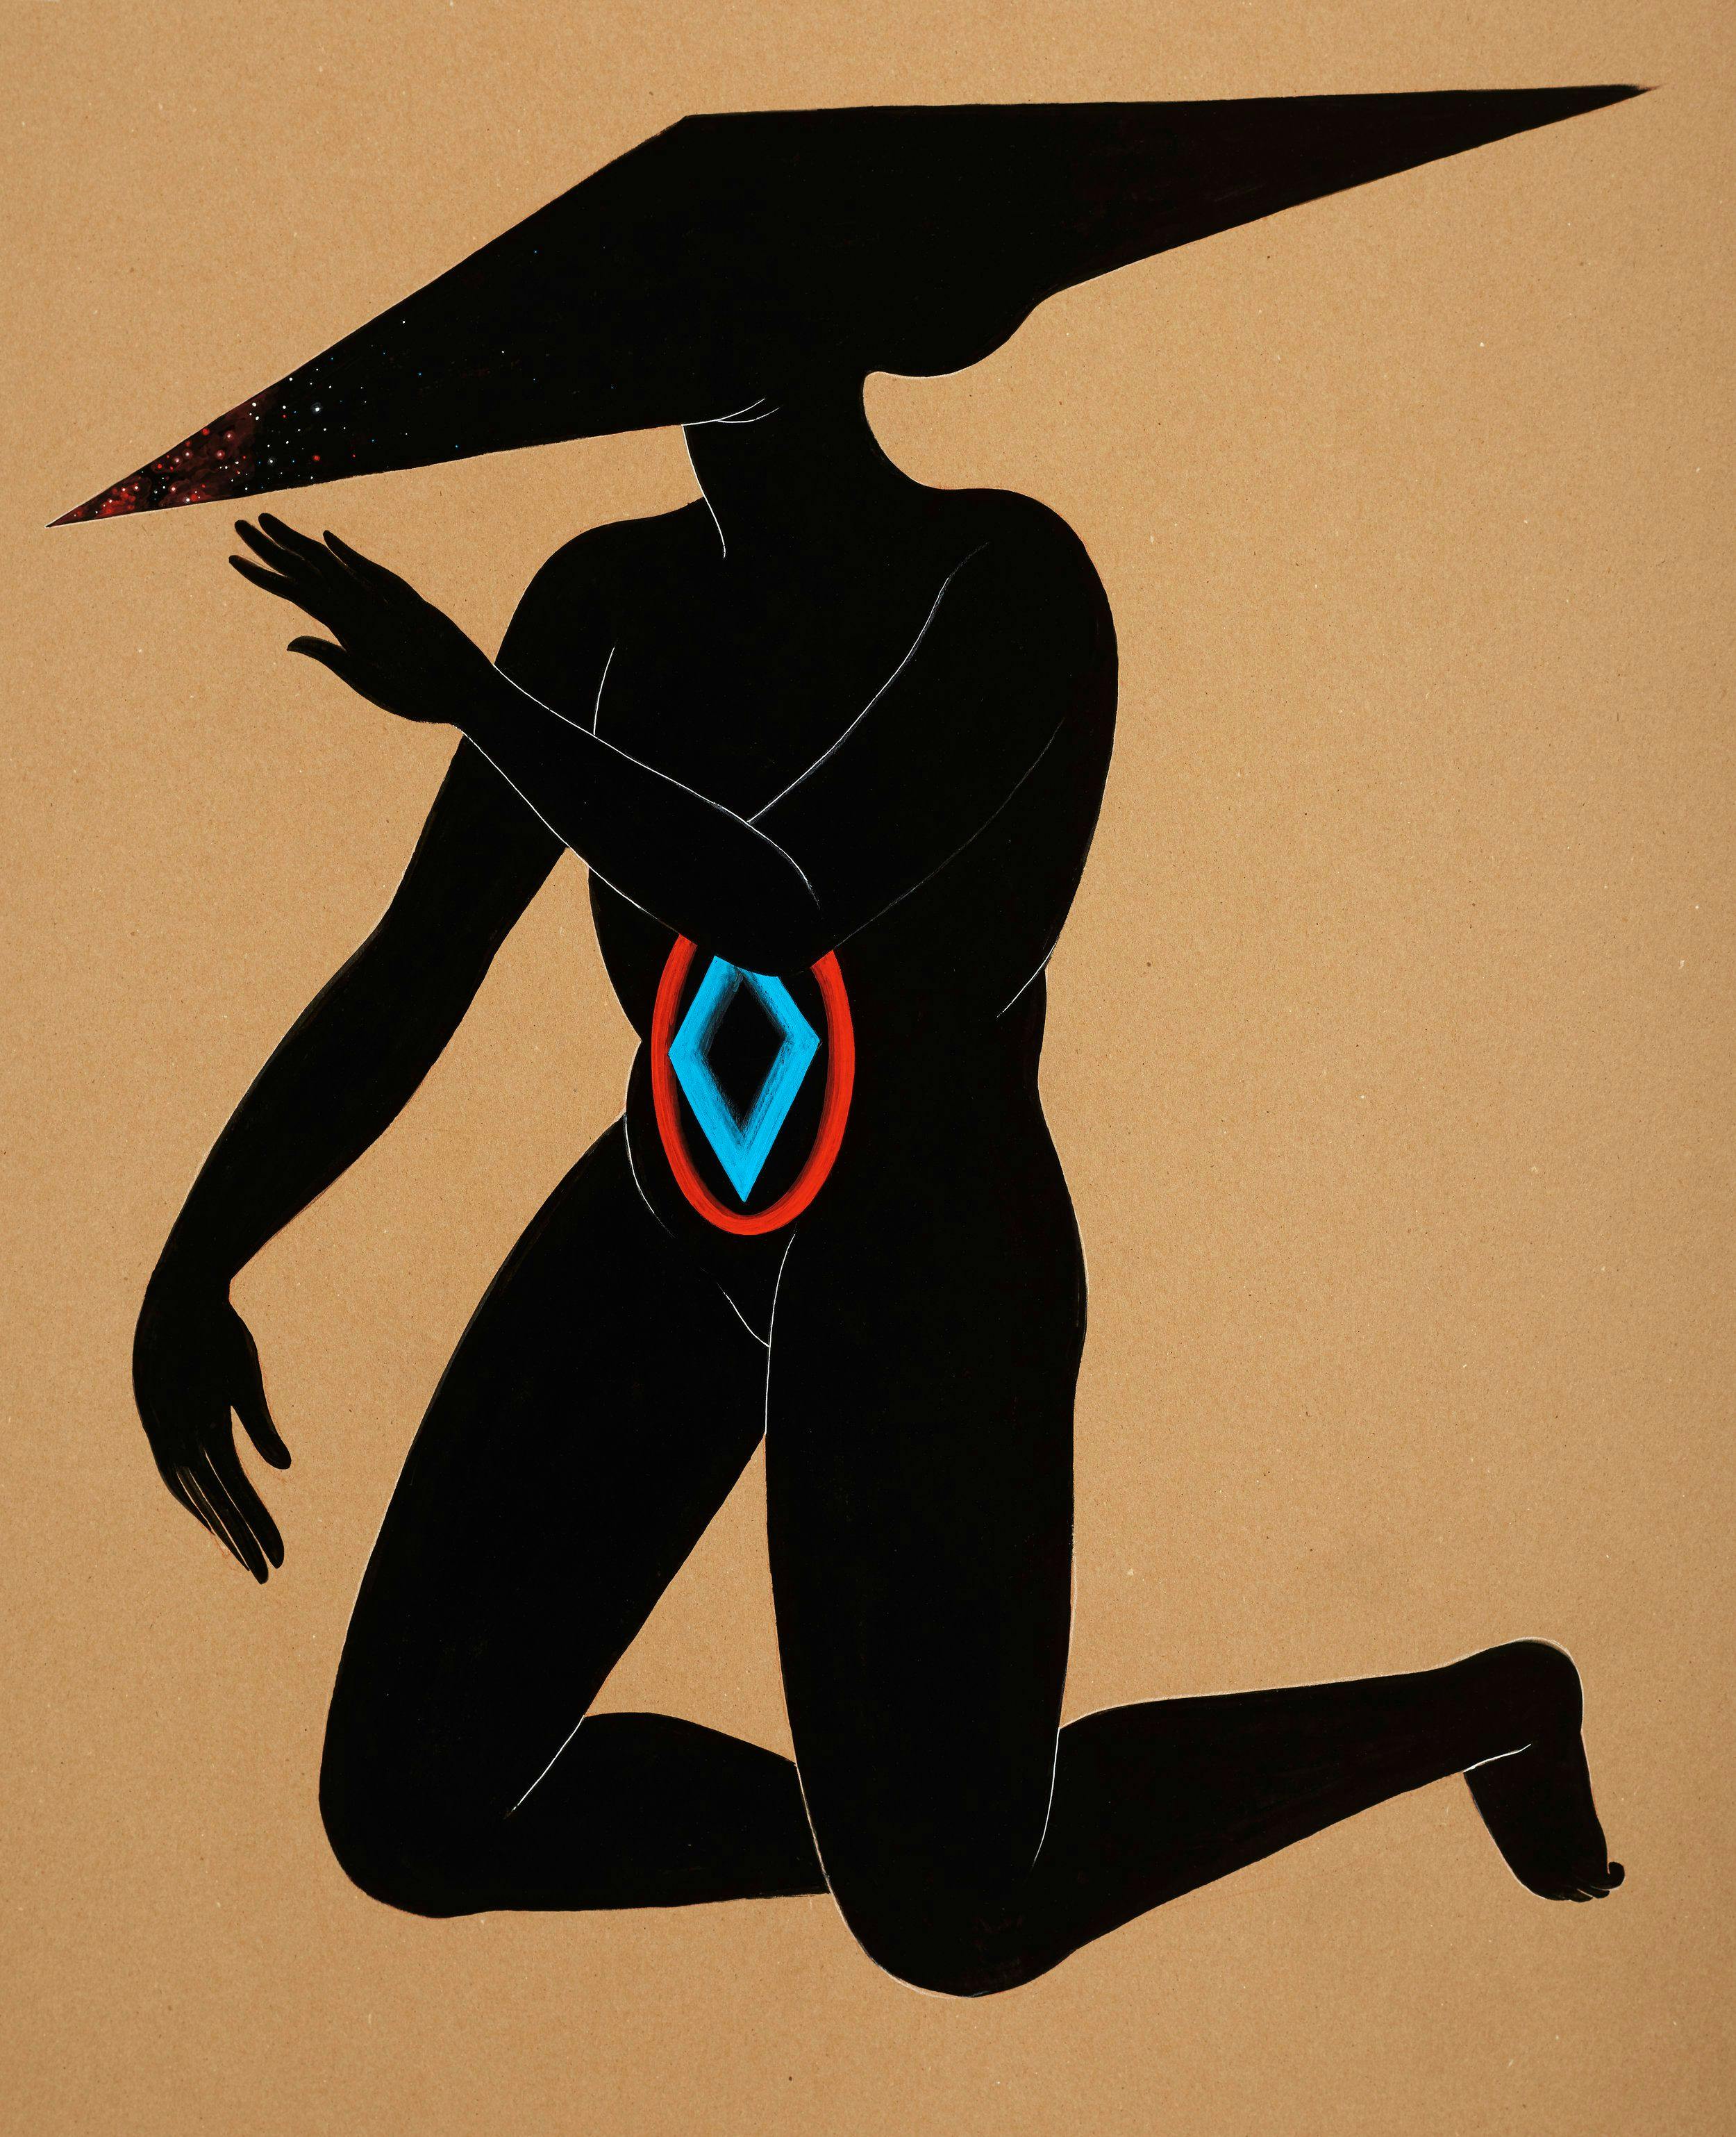 A black silhouette of a figure against a brown background crawls on their knees with their hands pawing through the air. In place of a head is a large flat rhomboid with celestial glitter at one end, and on the figure’s belly is a blue diamond encased by a red circle.